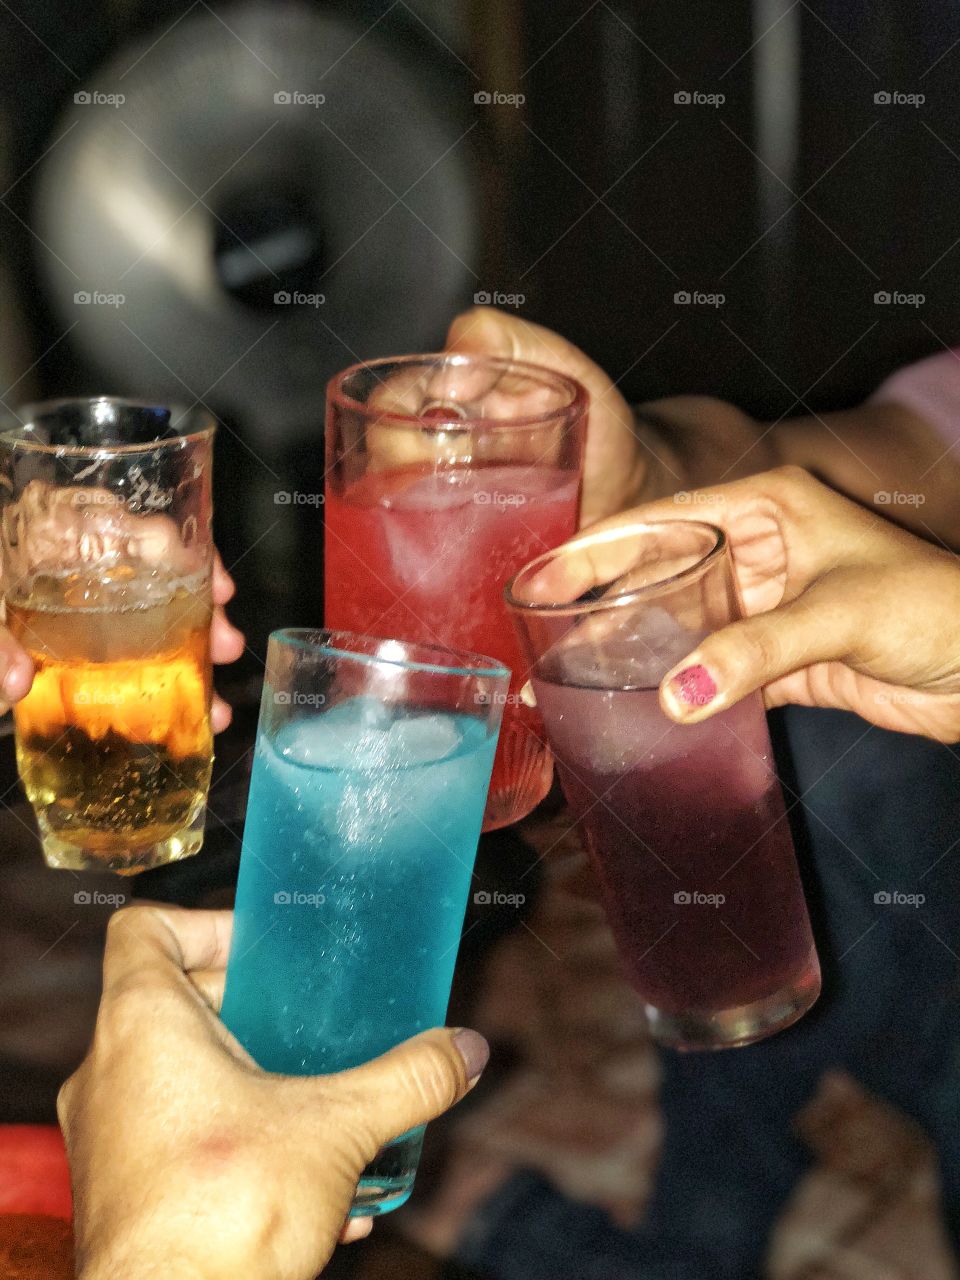 Cheers to the good life! Good friendship! Colorful cocktails! 🥂🍷🥃🍹🍸